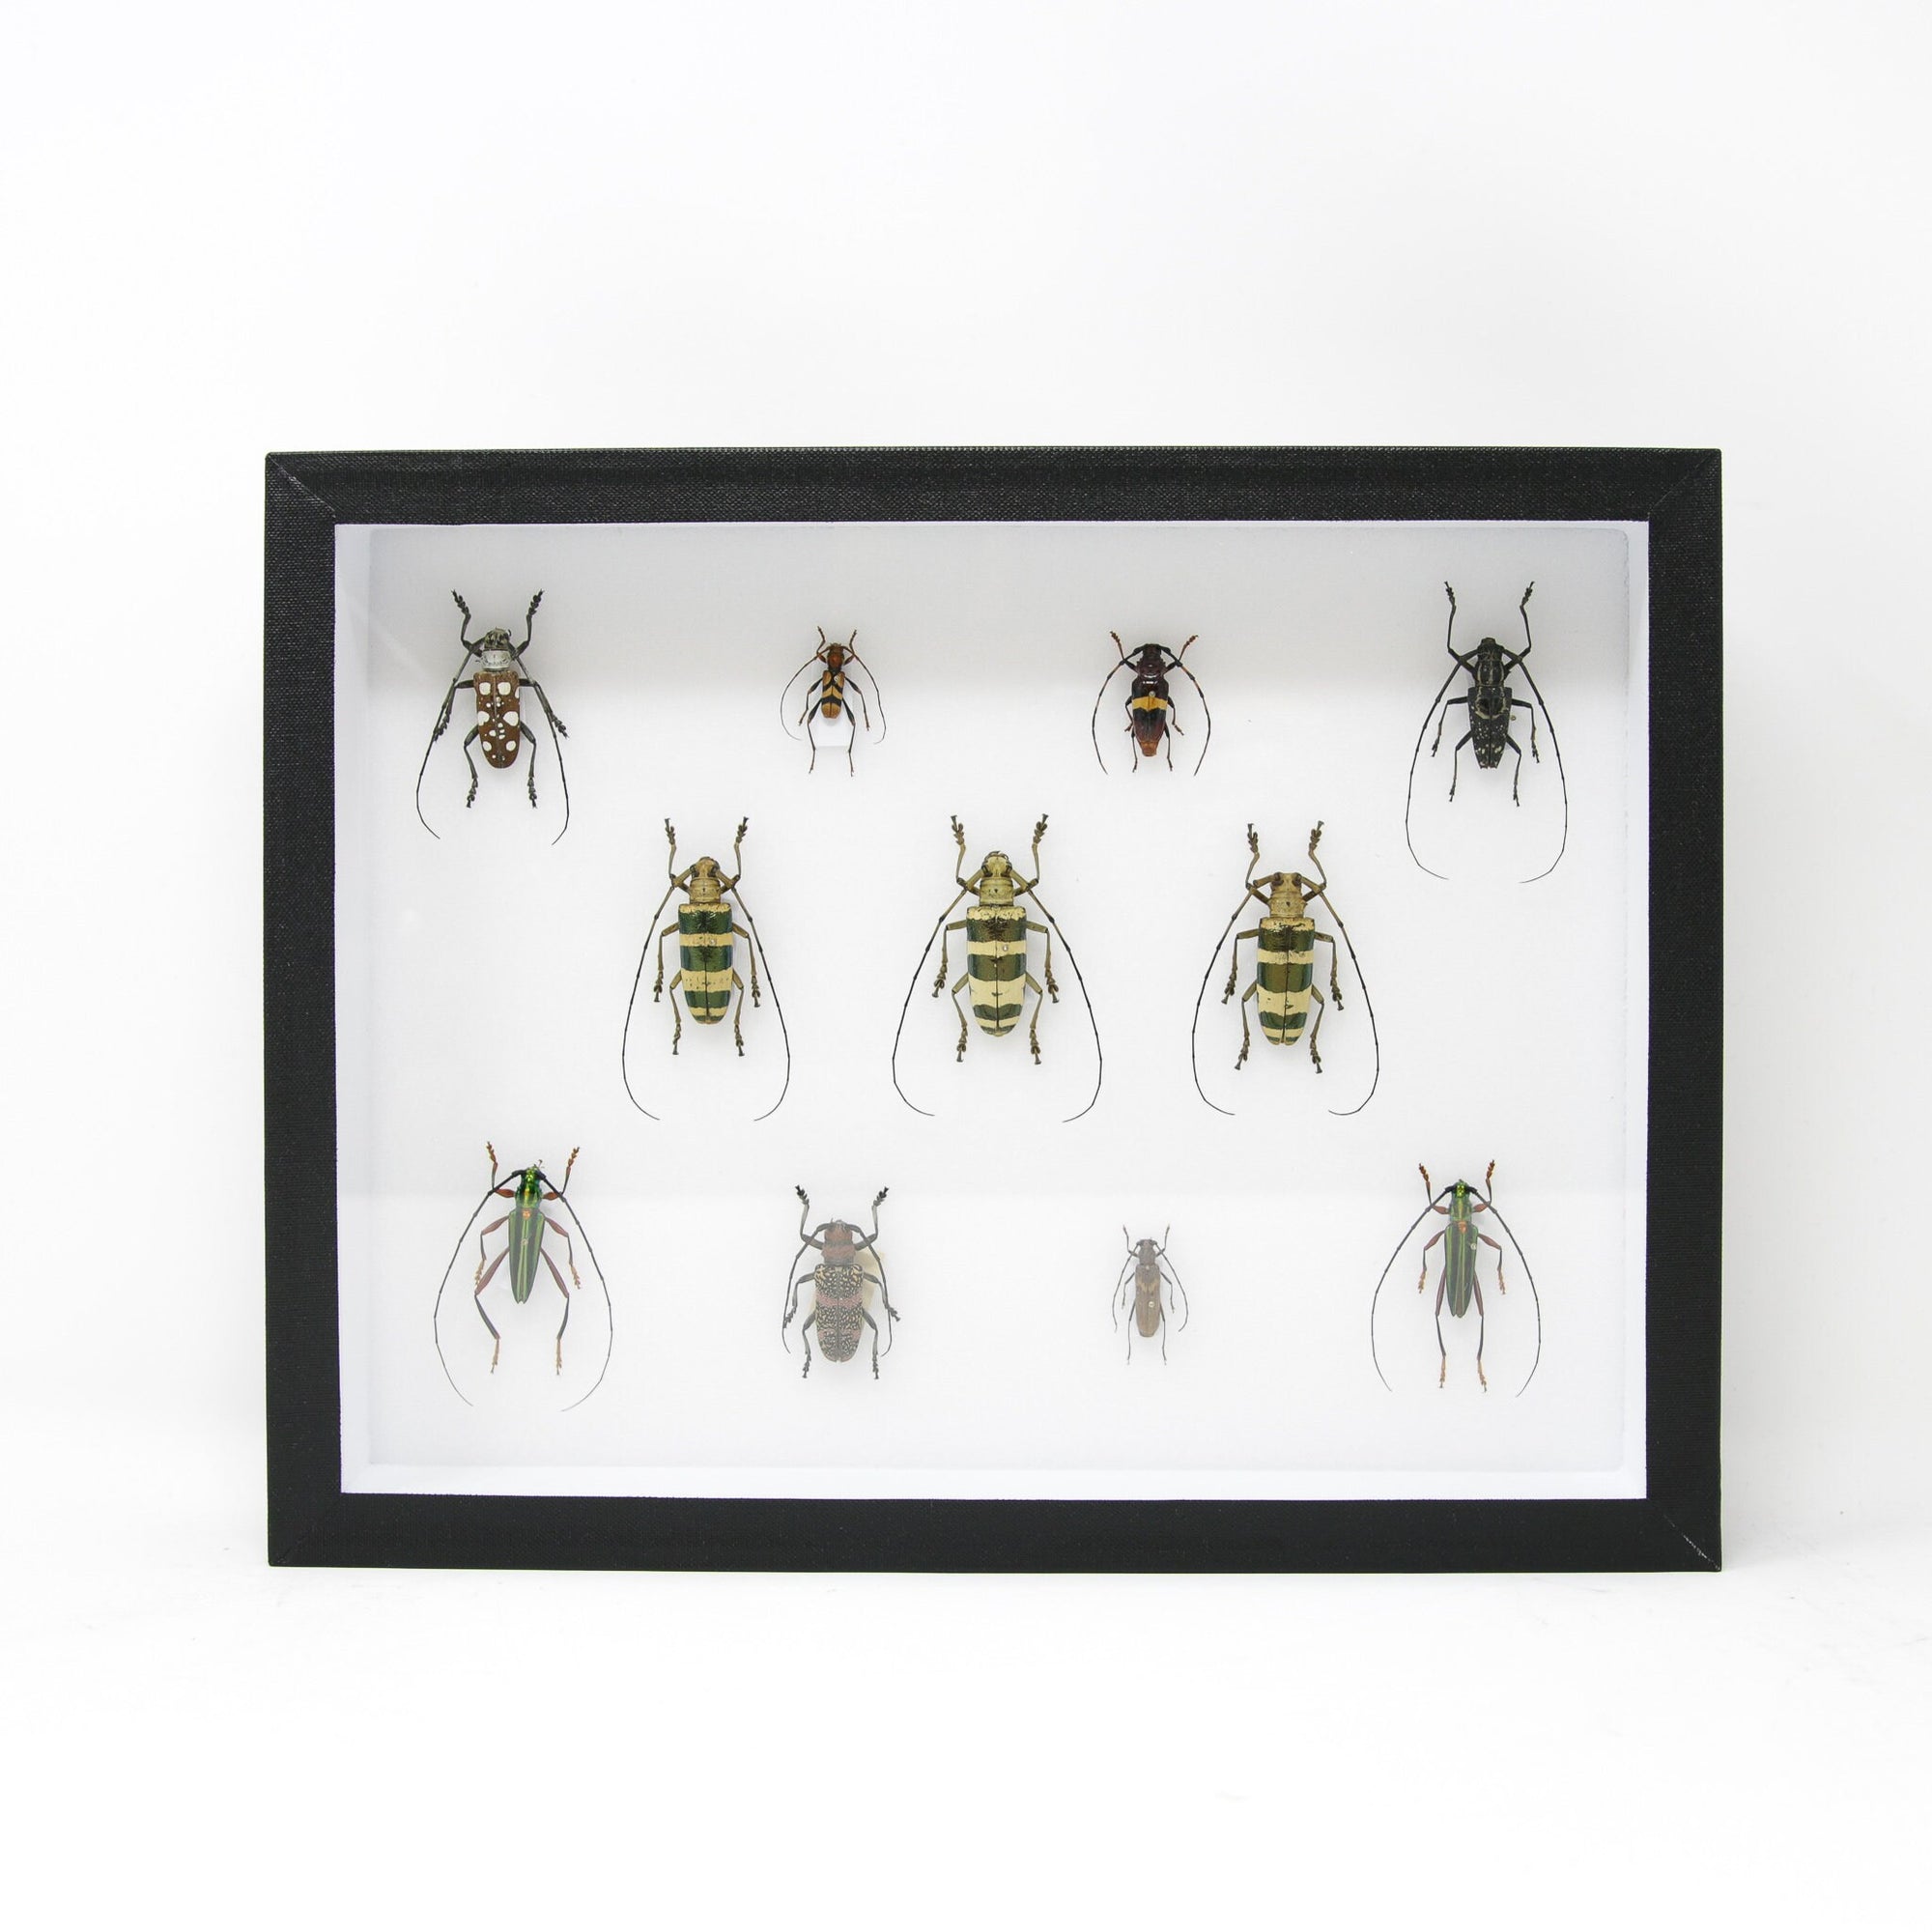 Very Fine Quality Pinned Insect Collection with Scientific Data | A1 Beetle Specimens in a Museum Entomology Box Frame | 12x9x2 inch (SKU33)